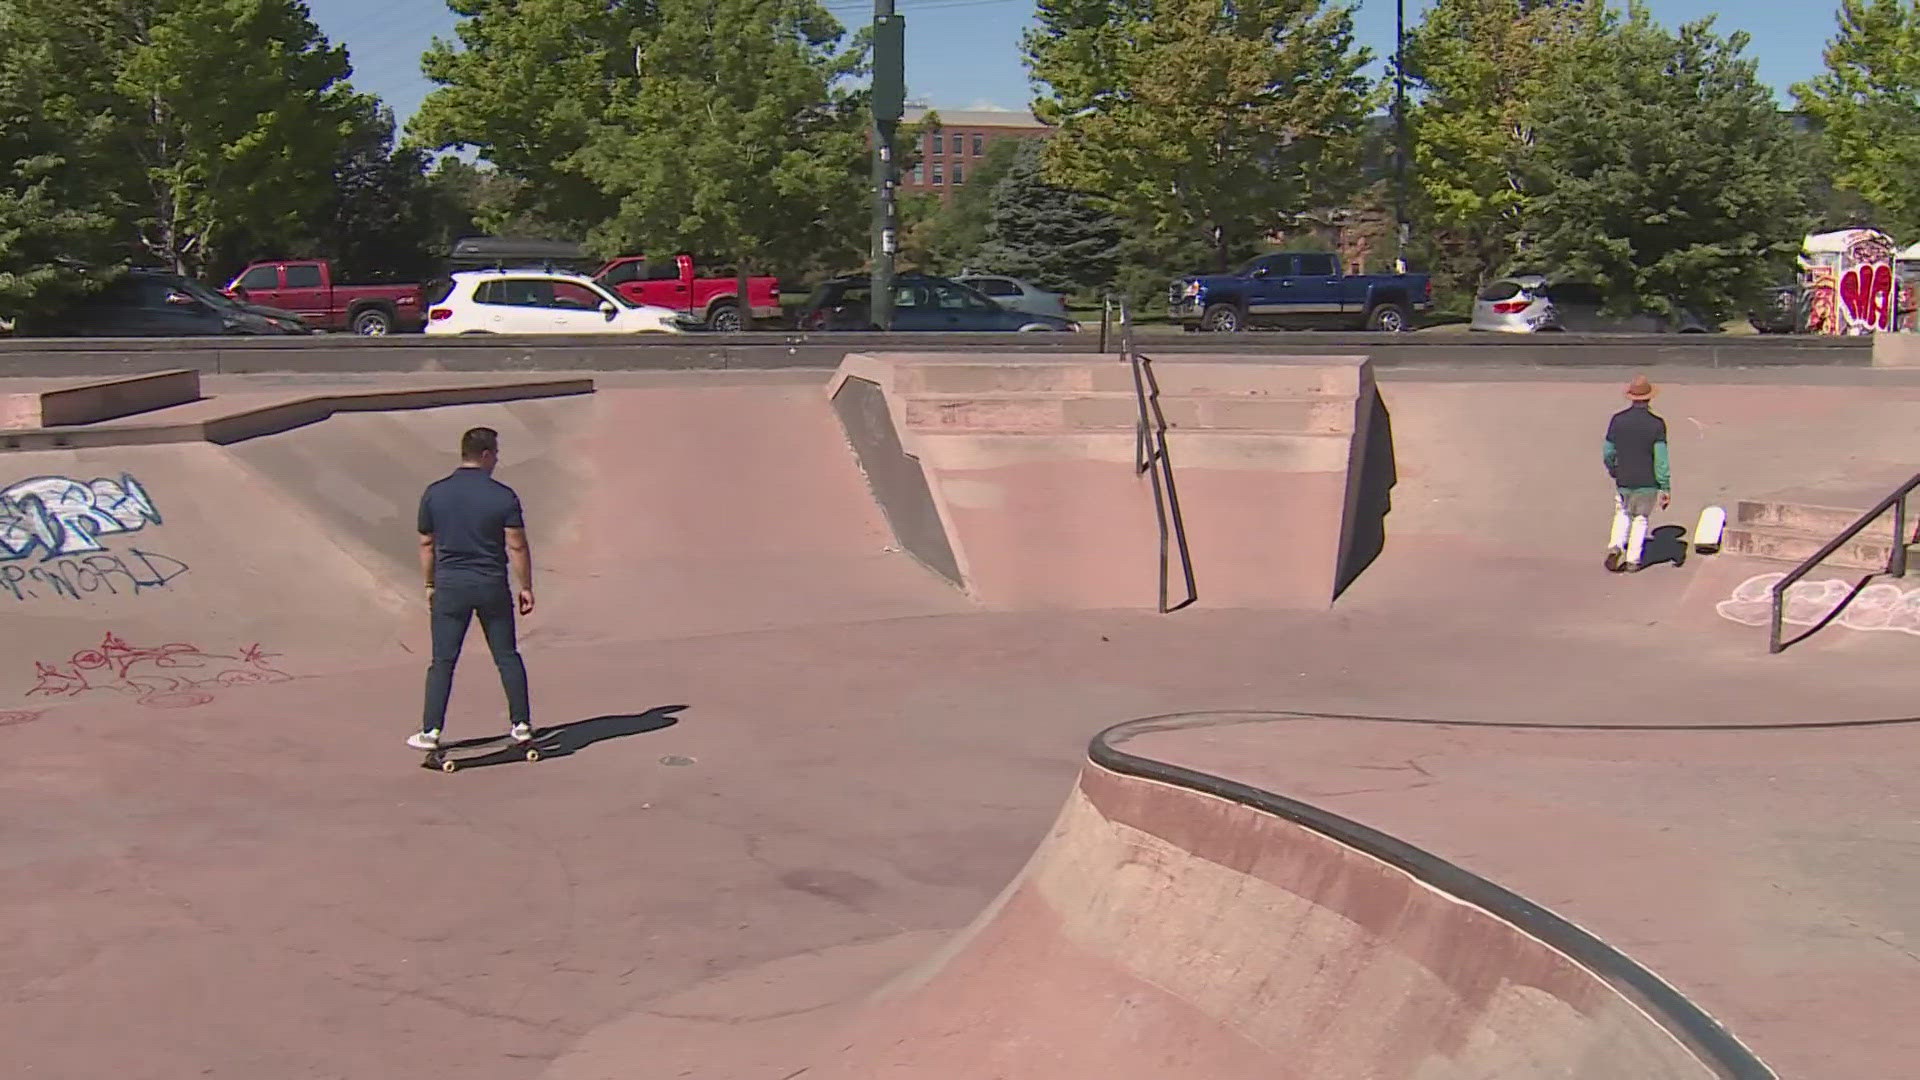 Anchor Jordan Chavez got some tips from a skateboarding educator ahead of the Summer Olympics in Paris.